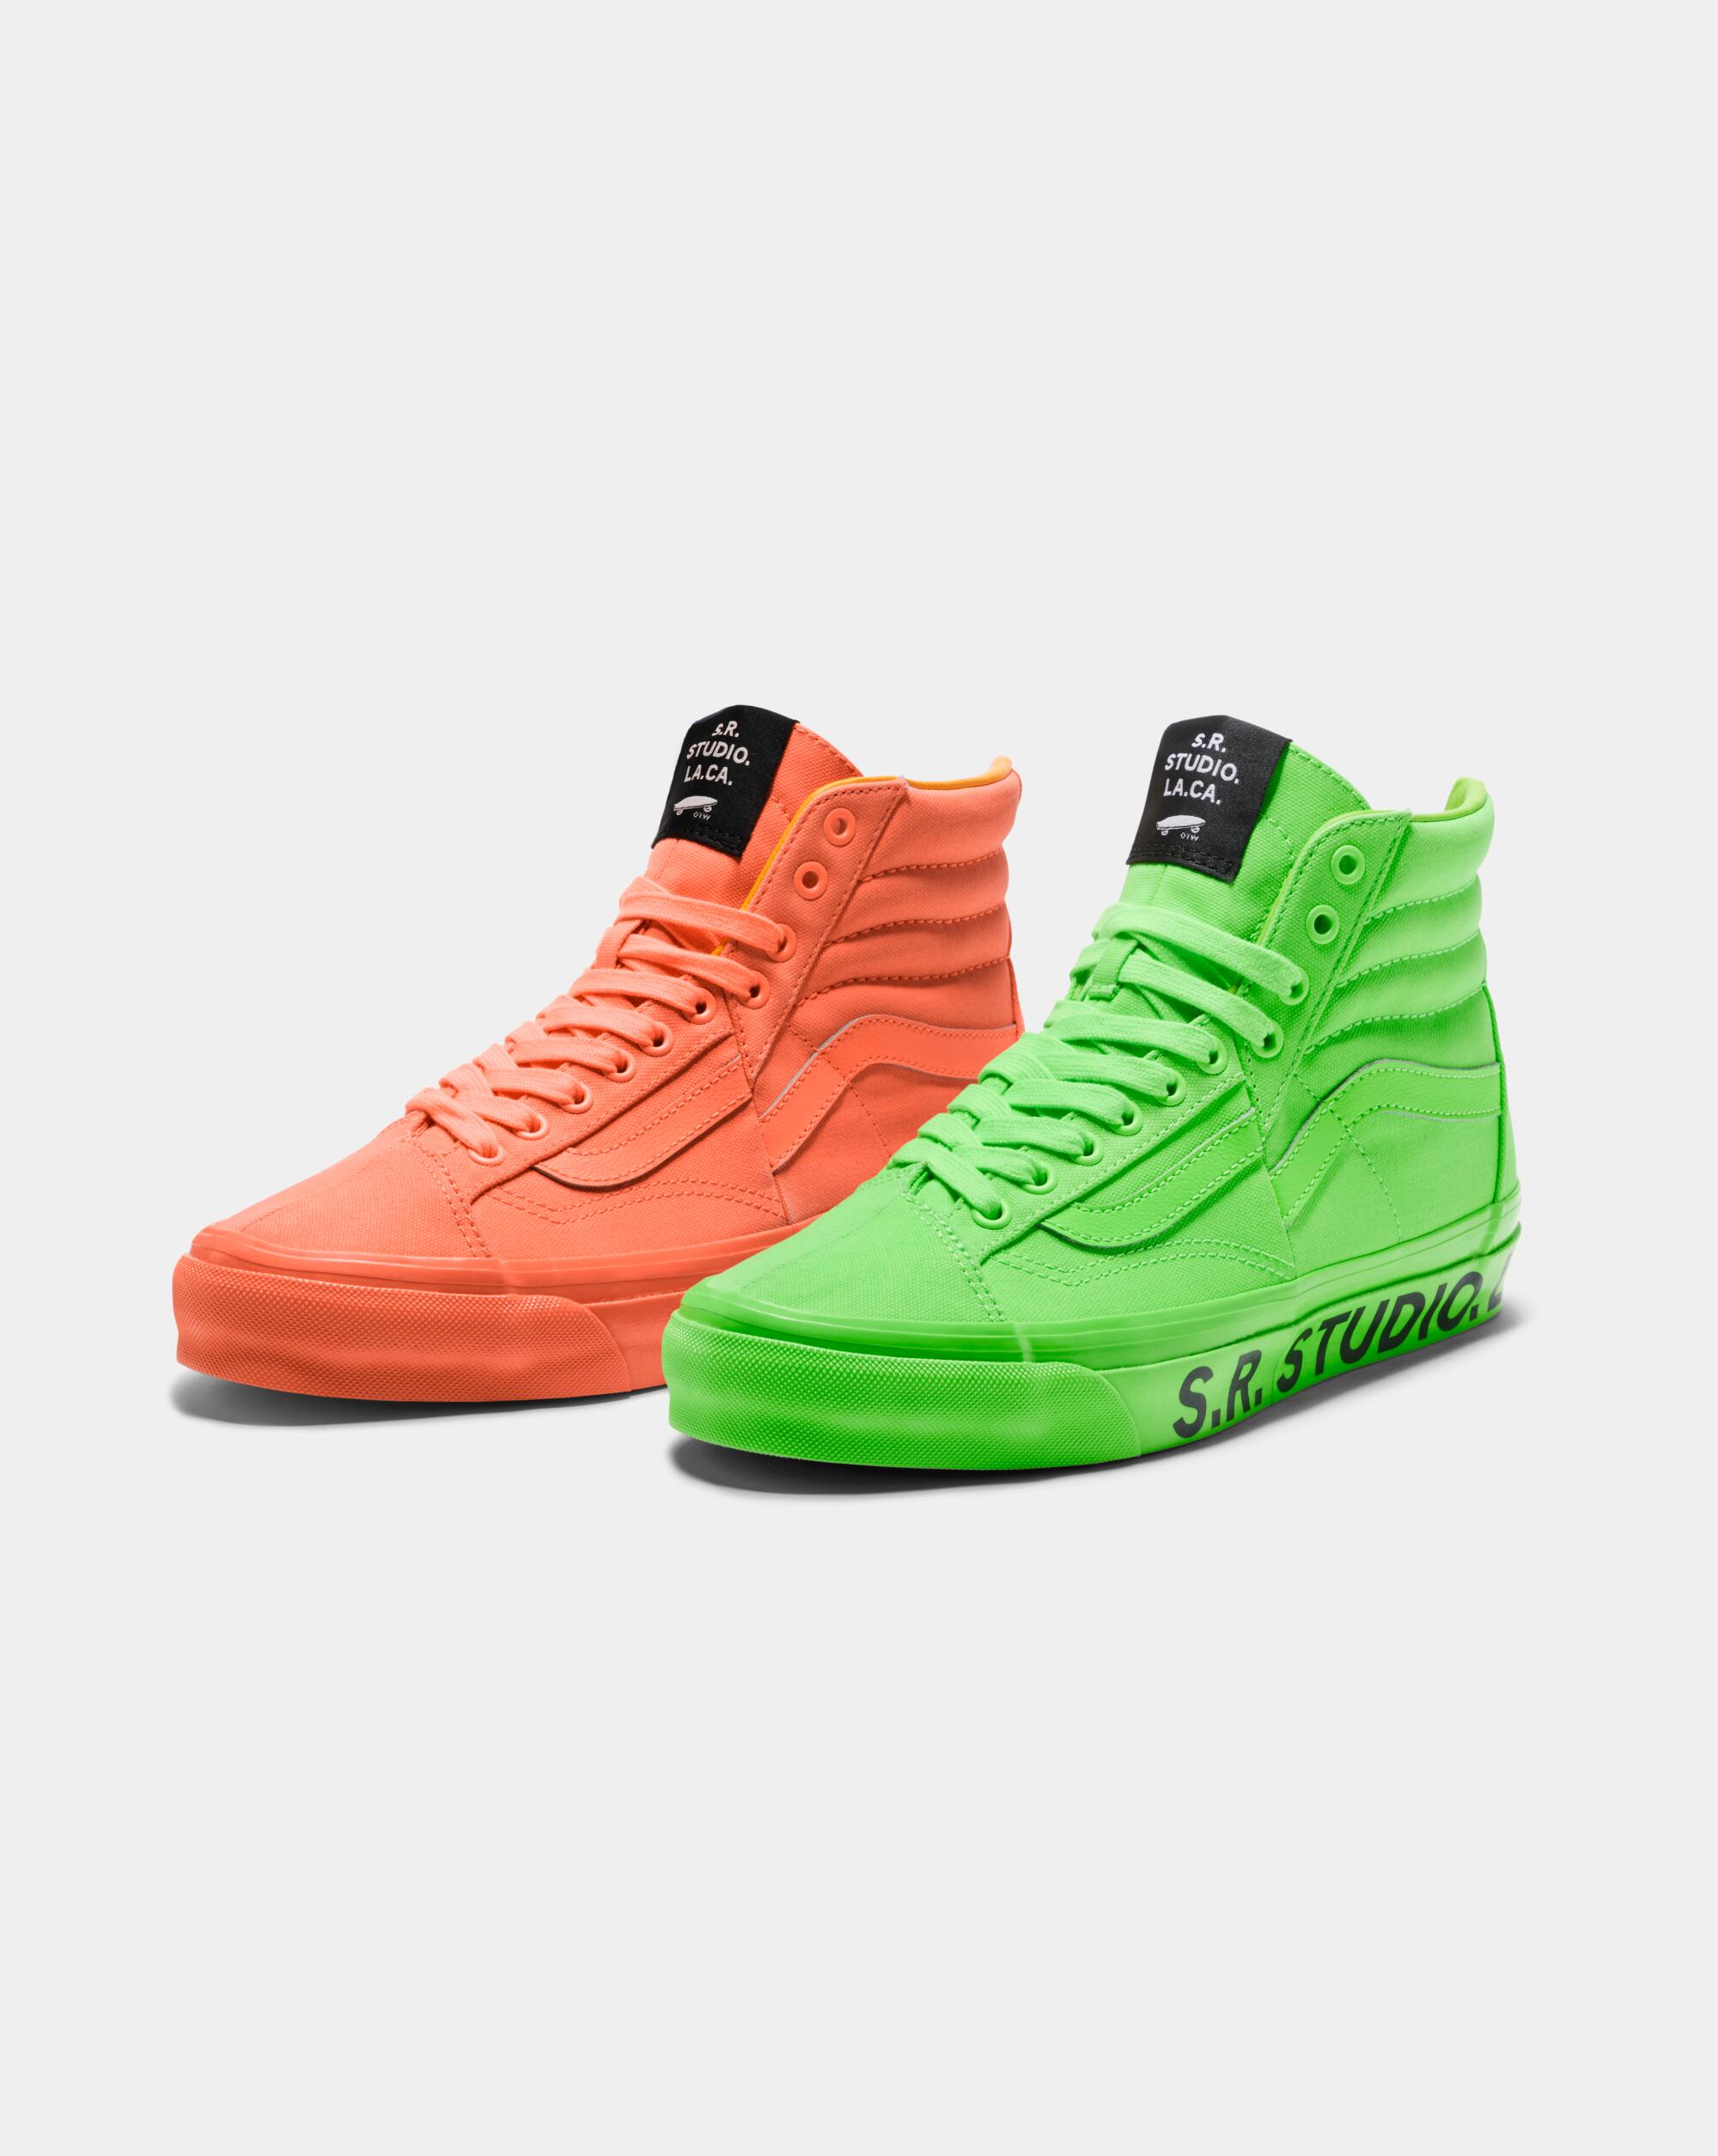 S.R. Studio LA. CA. for OTW by Vans collaborate on new sneakers in orange and lime green.